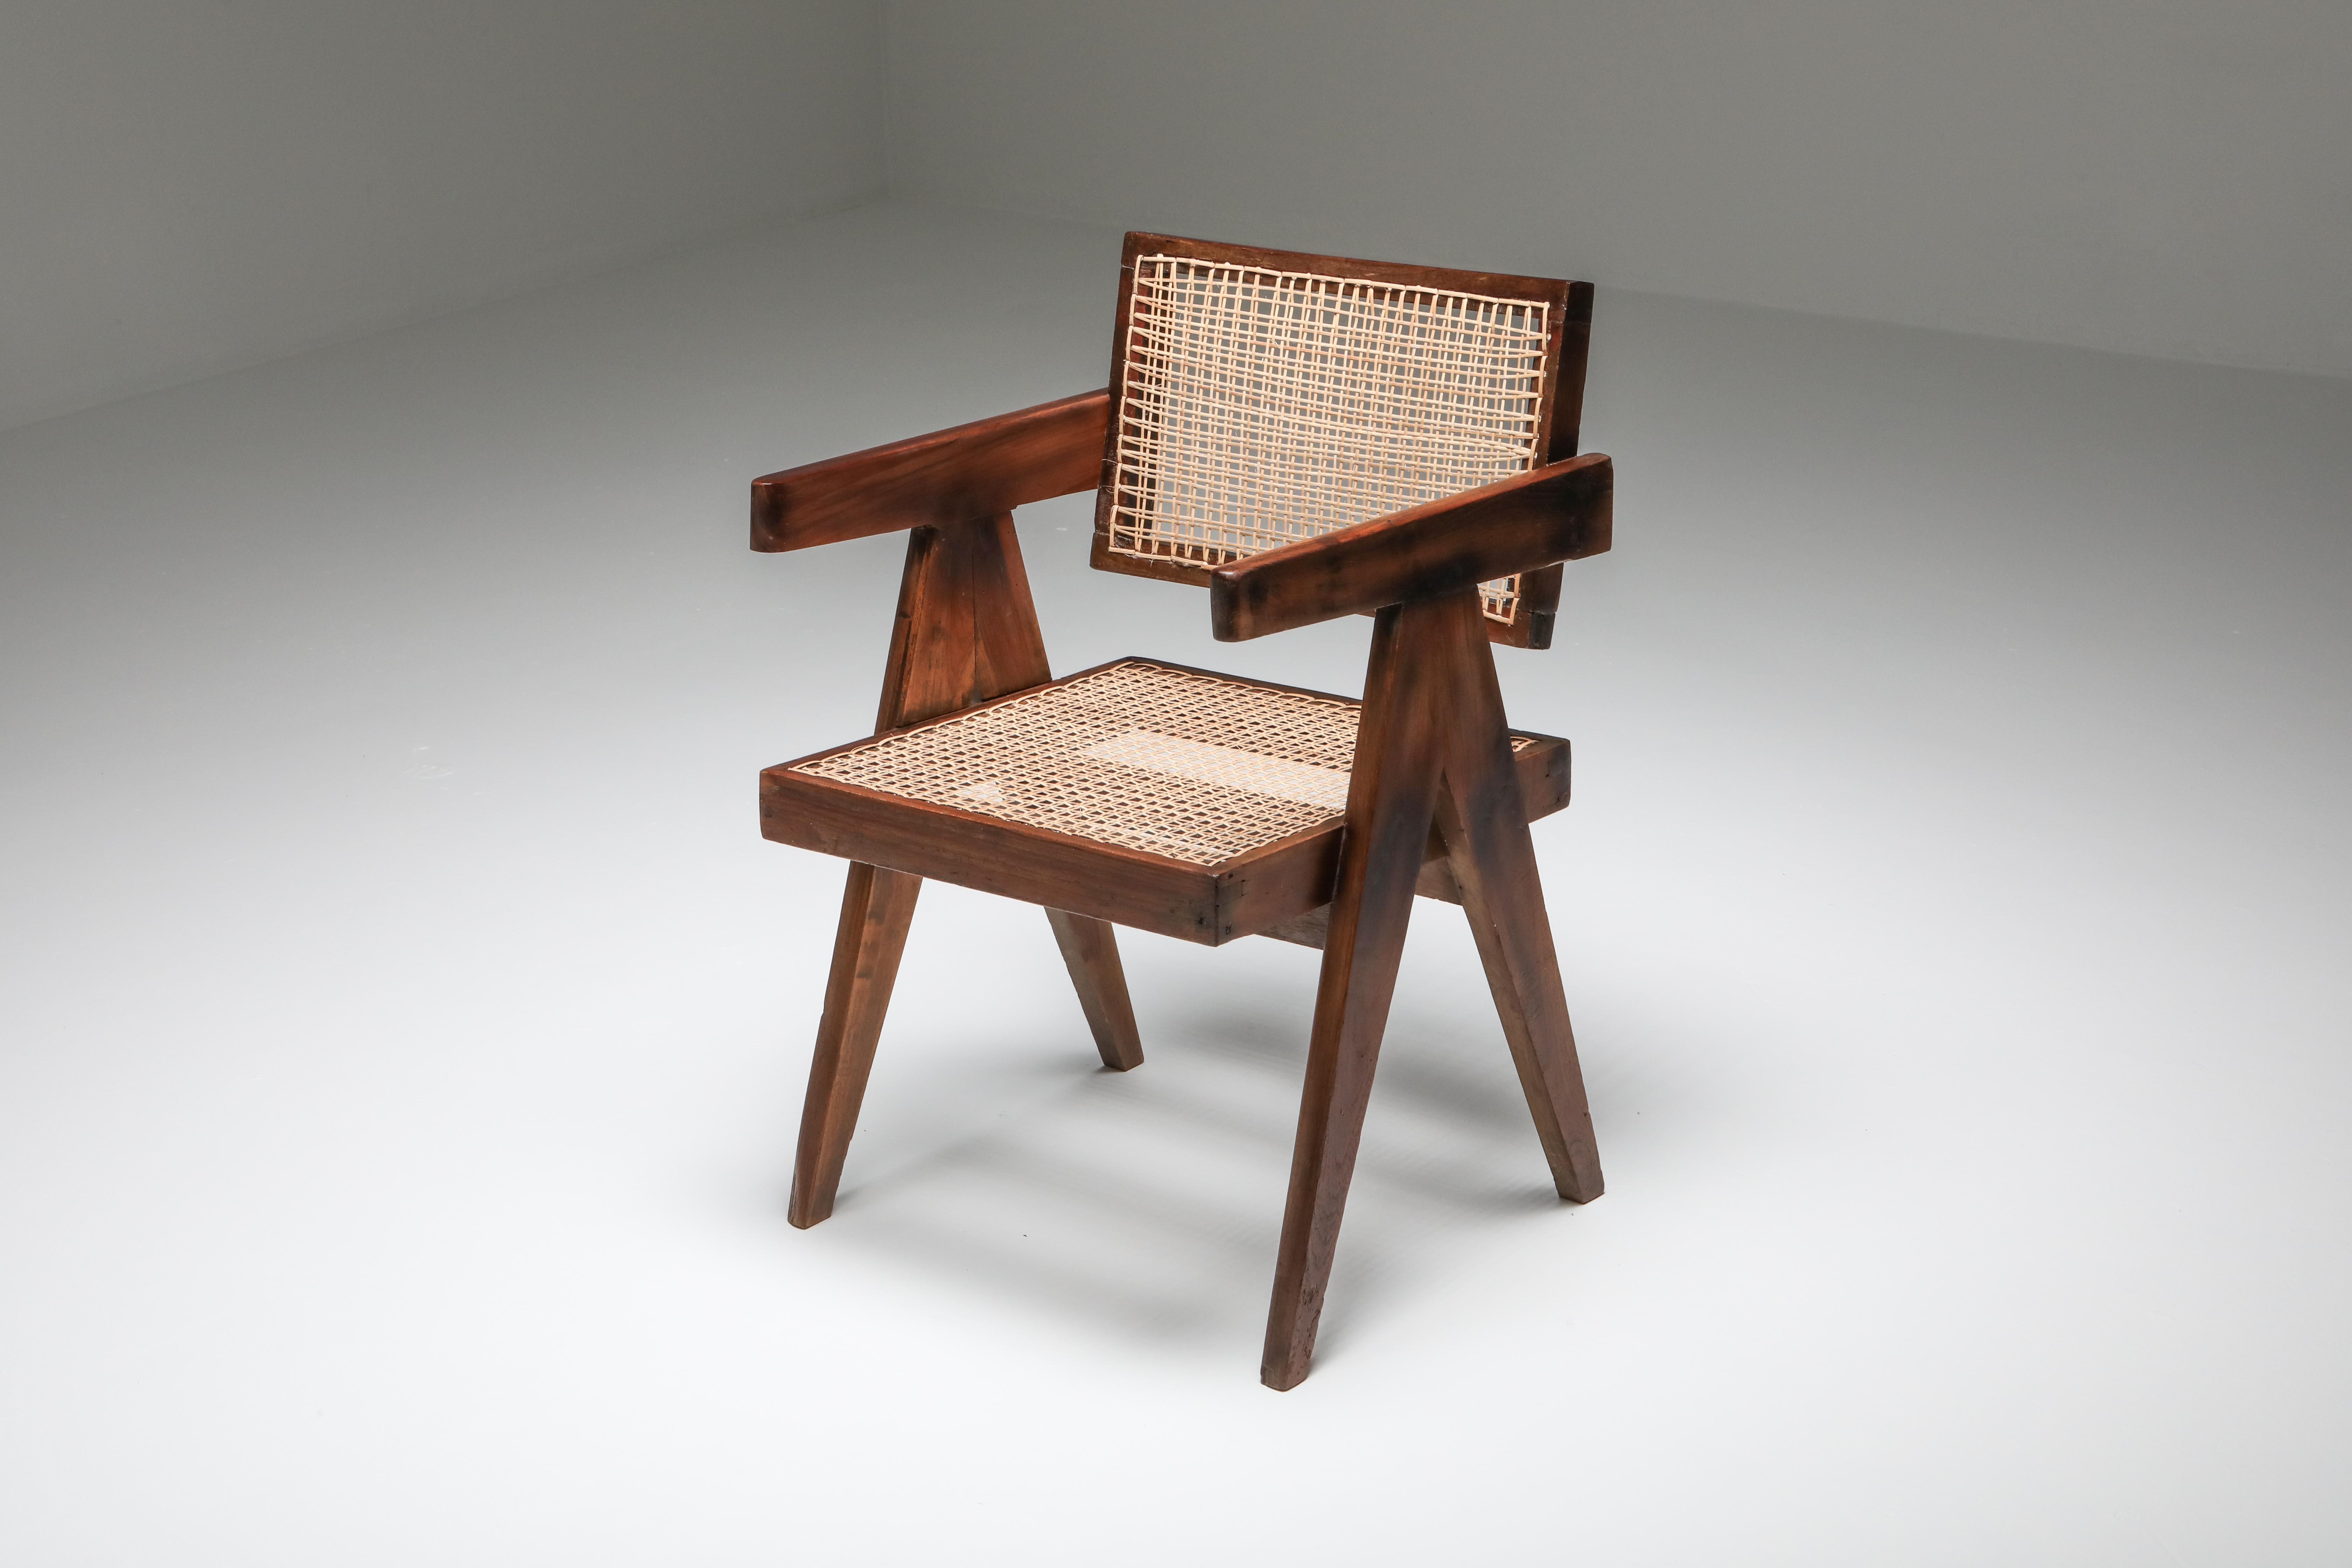 Floating back armchair, circa 1955, Pierre Jeanneret
Original teak and wicker armchair with cushions
Office chair from the administrative buildings of Chandigarh, professionally restored.
           